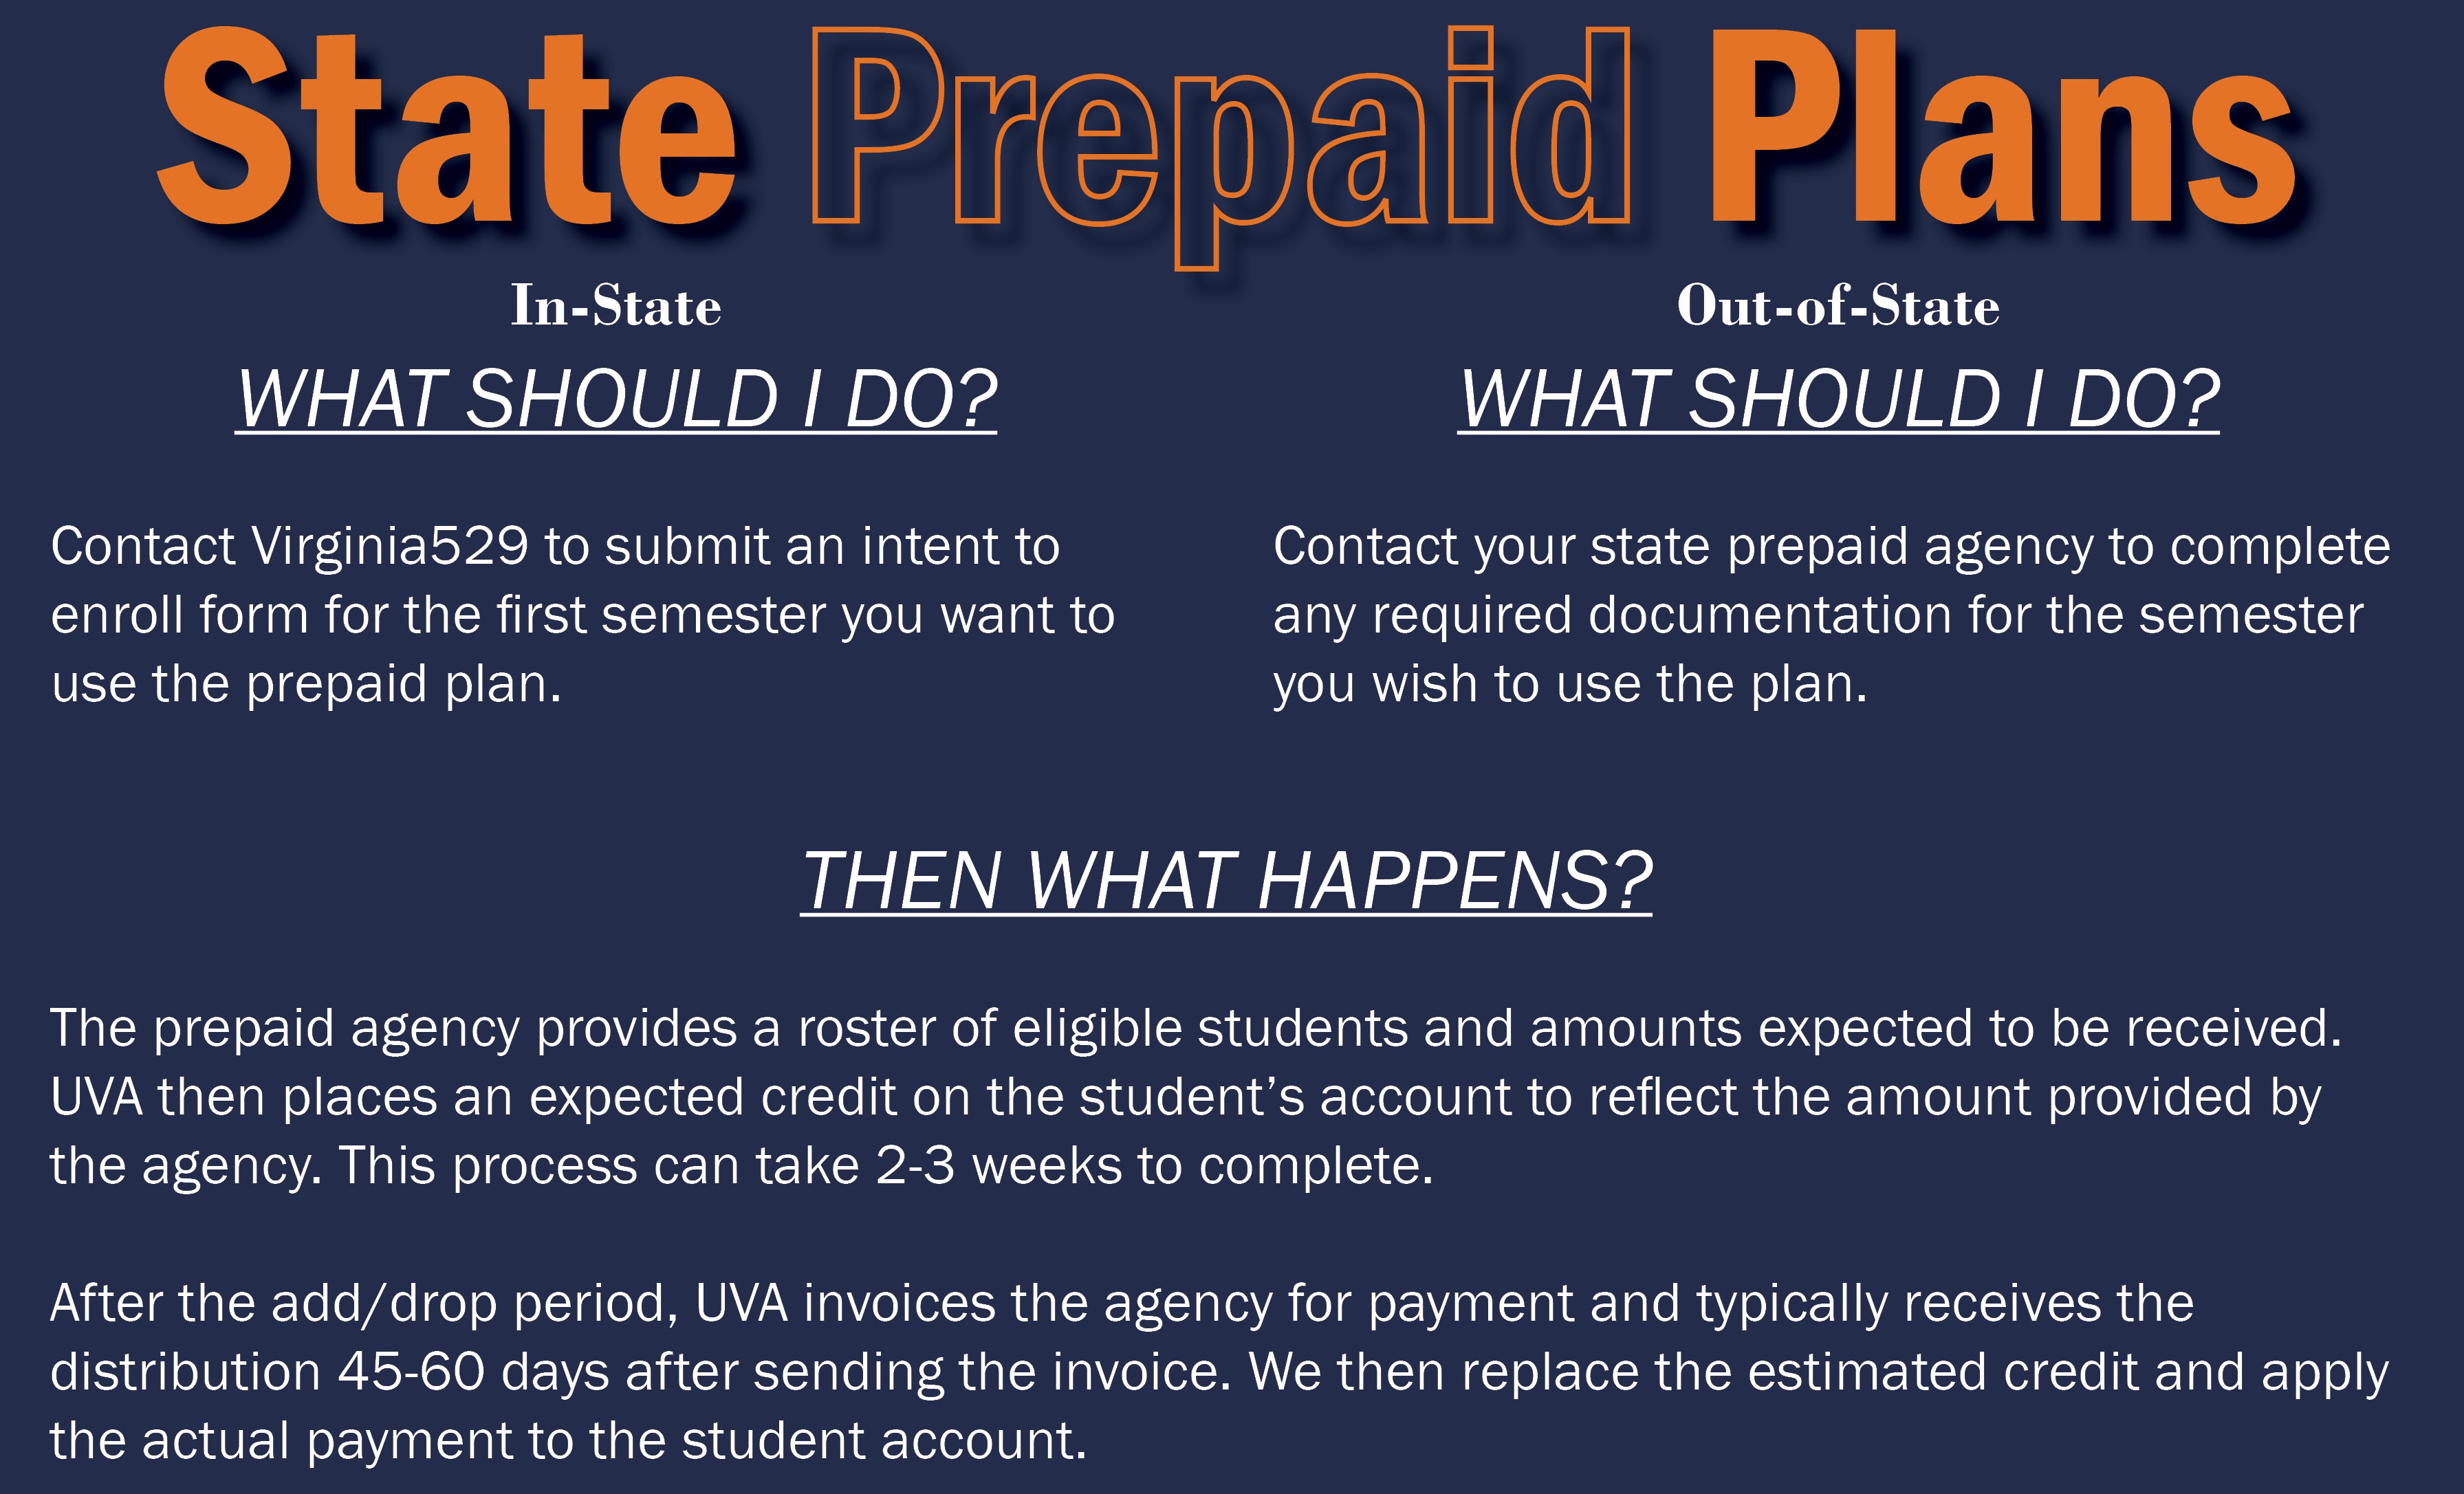 Basic steps on how to utilize a State Prepaid Plan